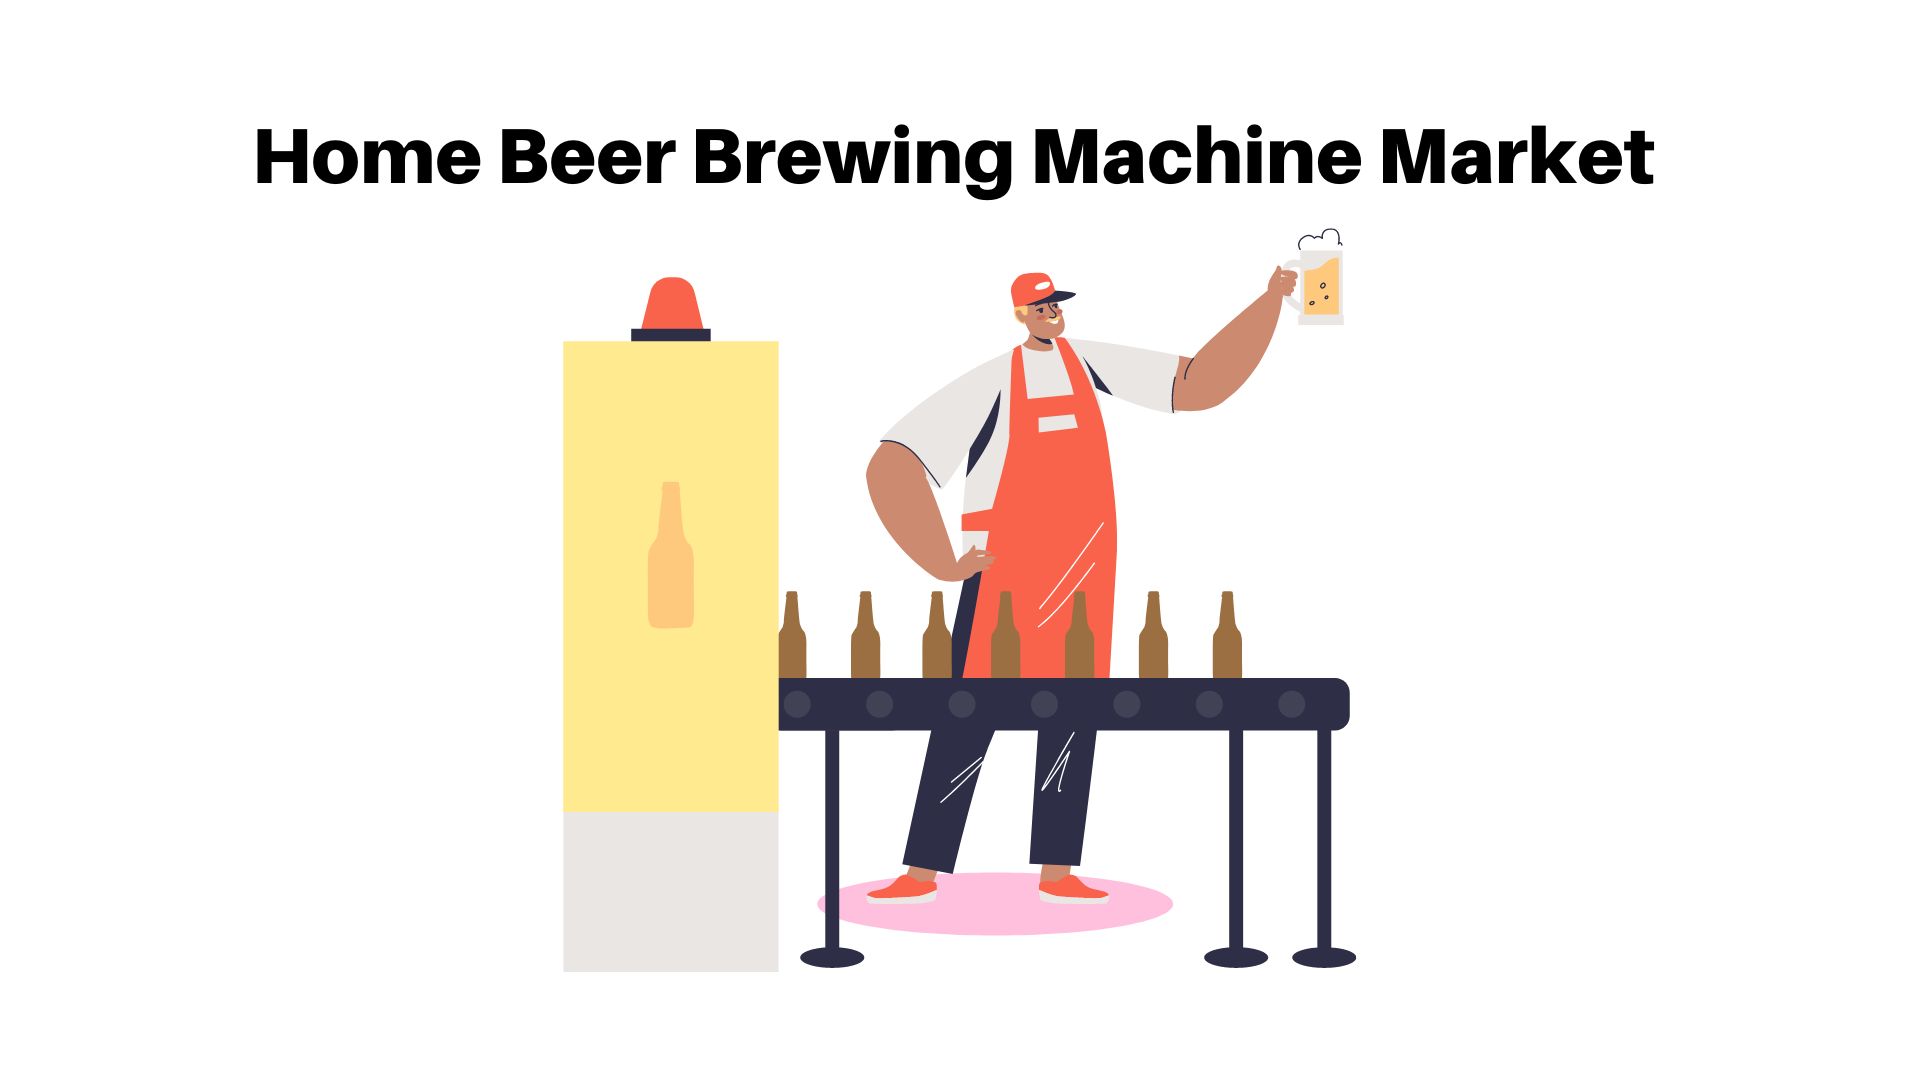 Home Beer Brewing Machine Market to Reach USD 27.0 Million by 2032 | CAGR of 13.7%